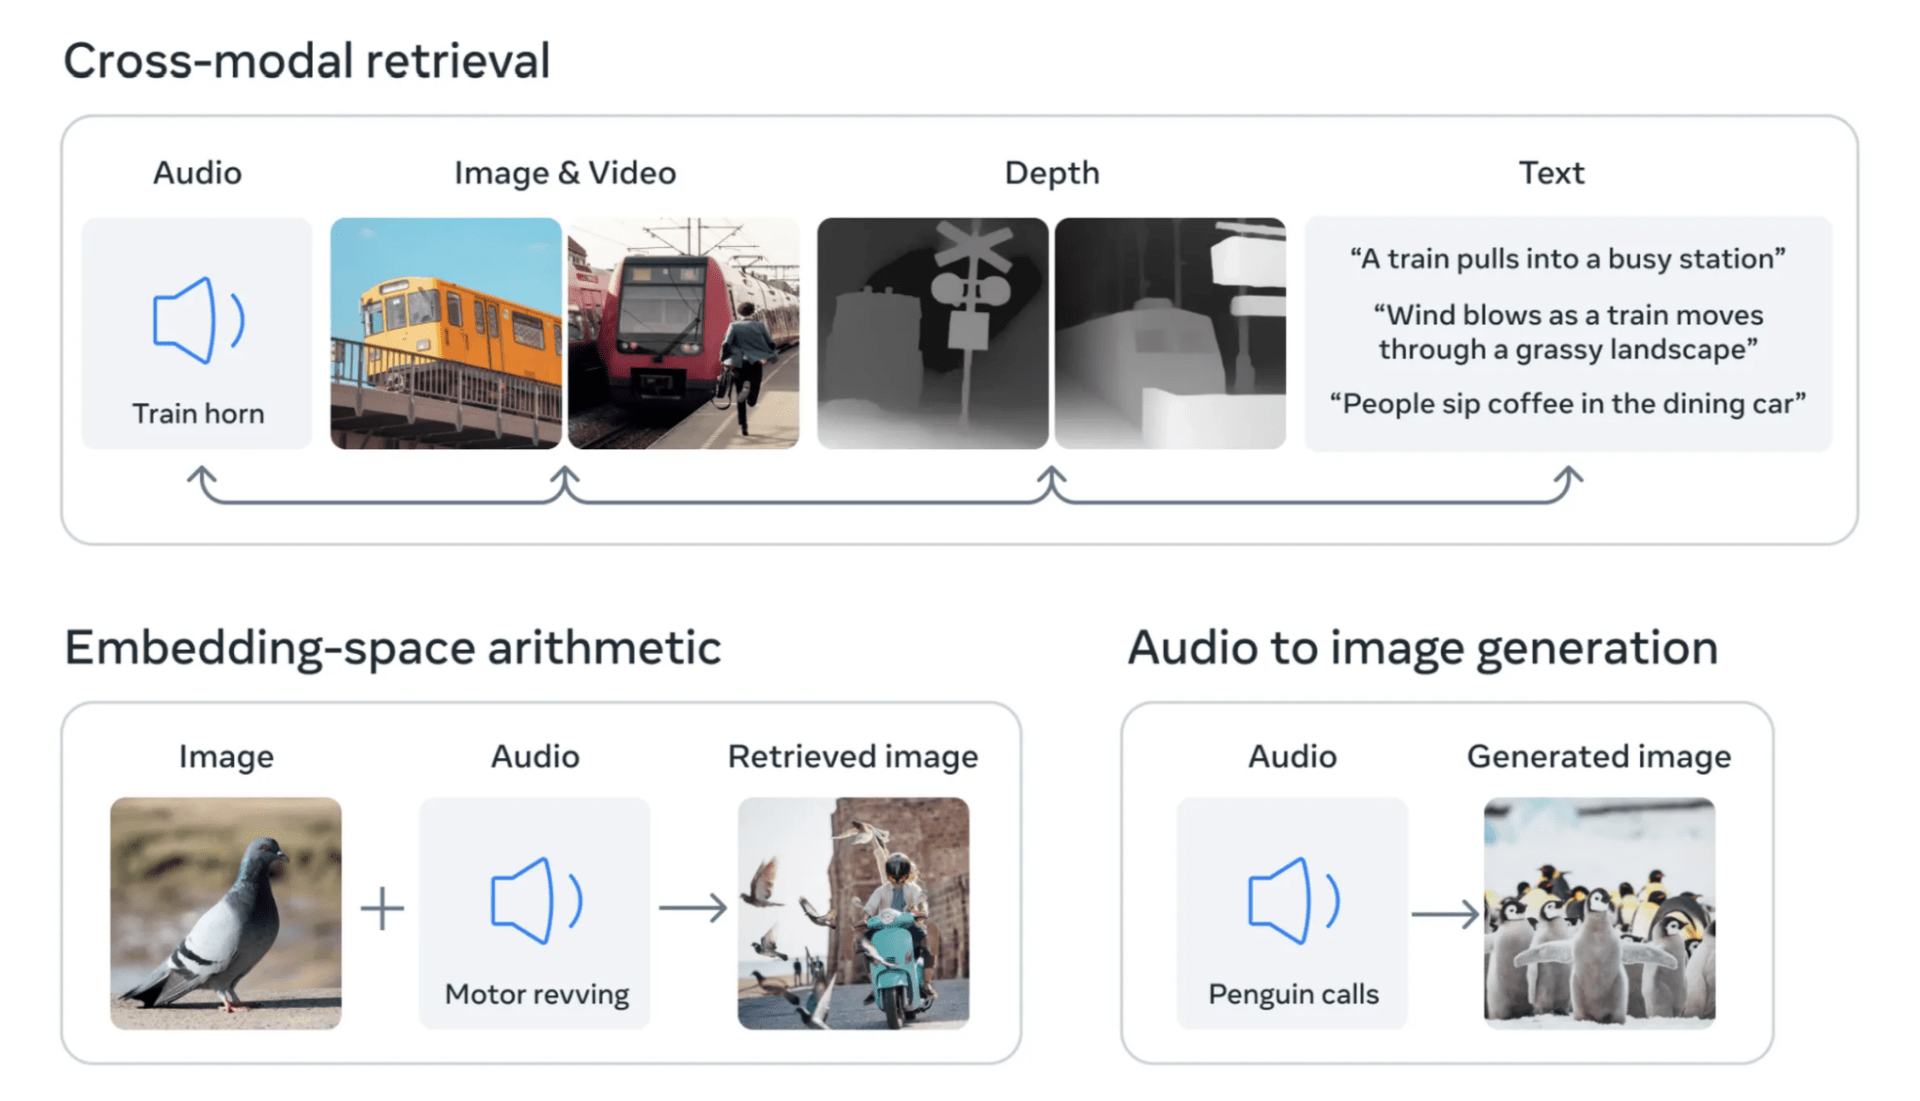 An image sharing examples of multi-sensory AI including audio, images, depth, and text